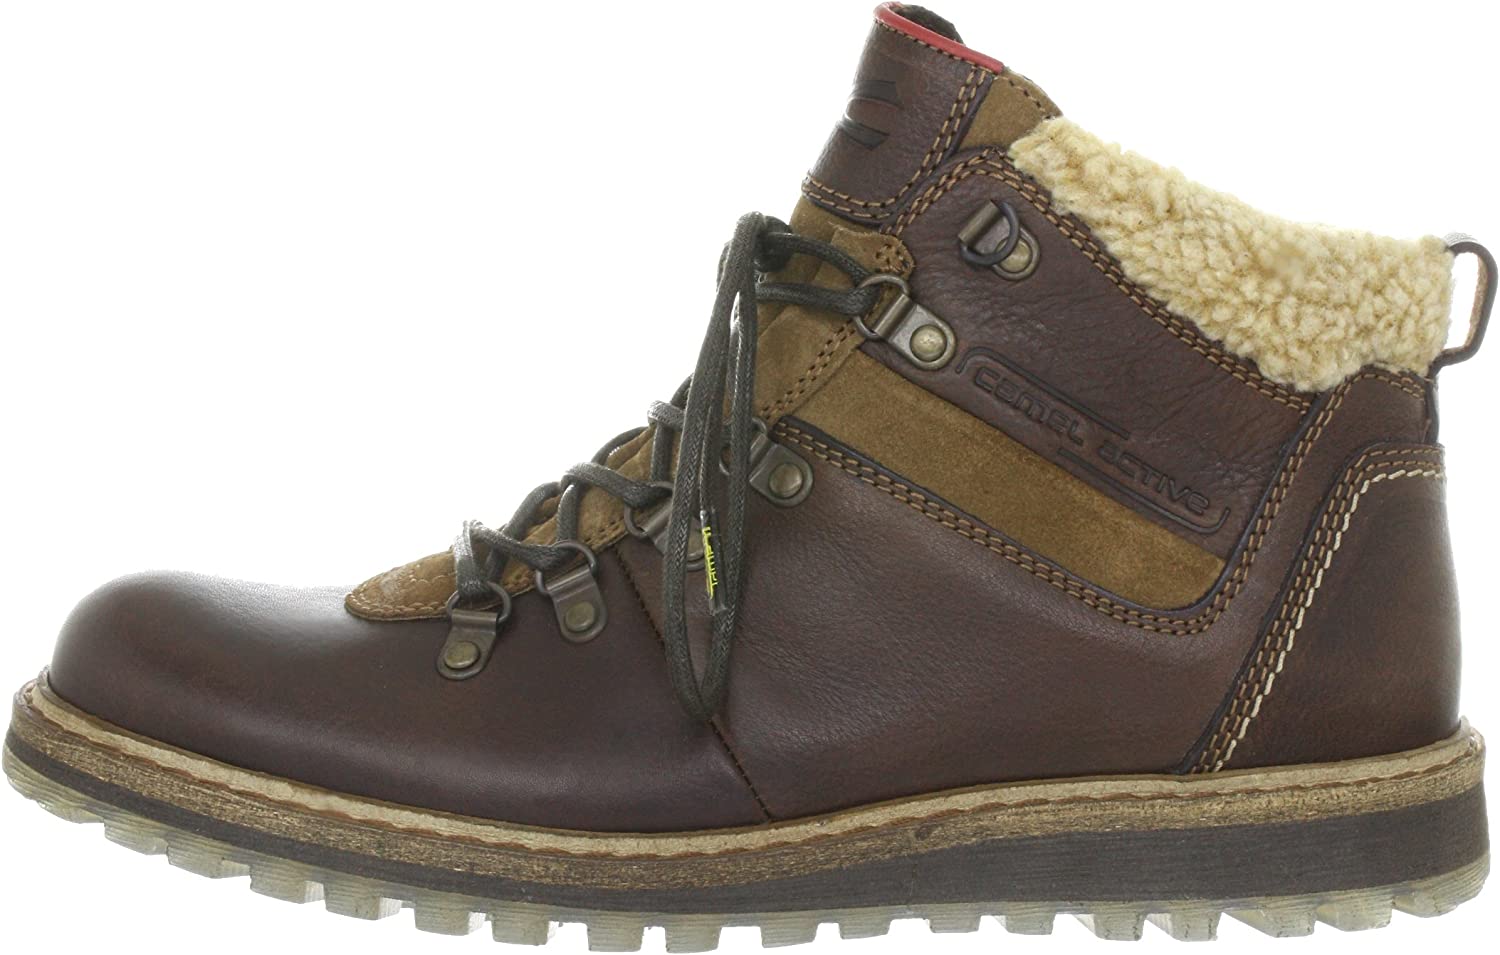 'Earl' men's ankle boot - Chaplinshoes'Earl' men's ankle bootCamel Active